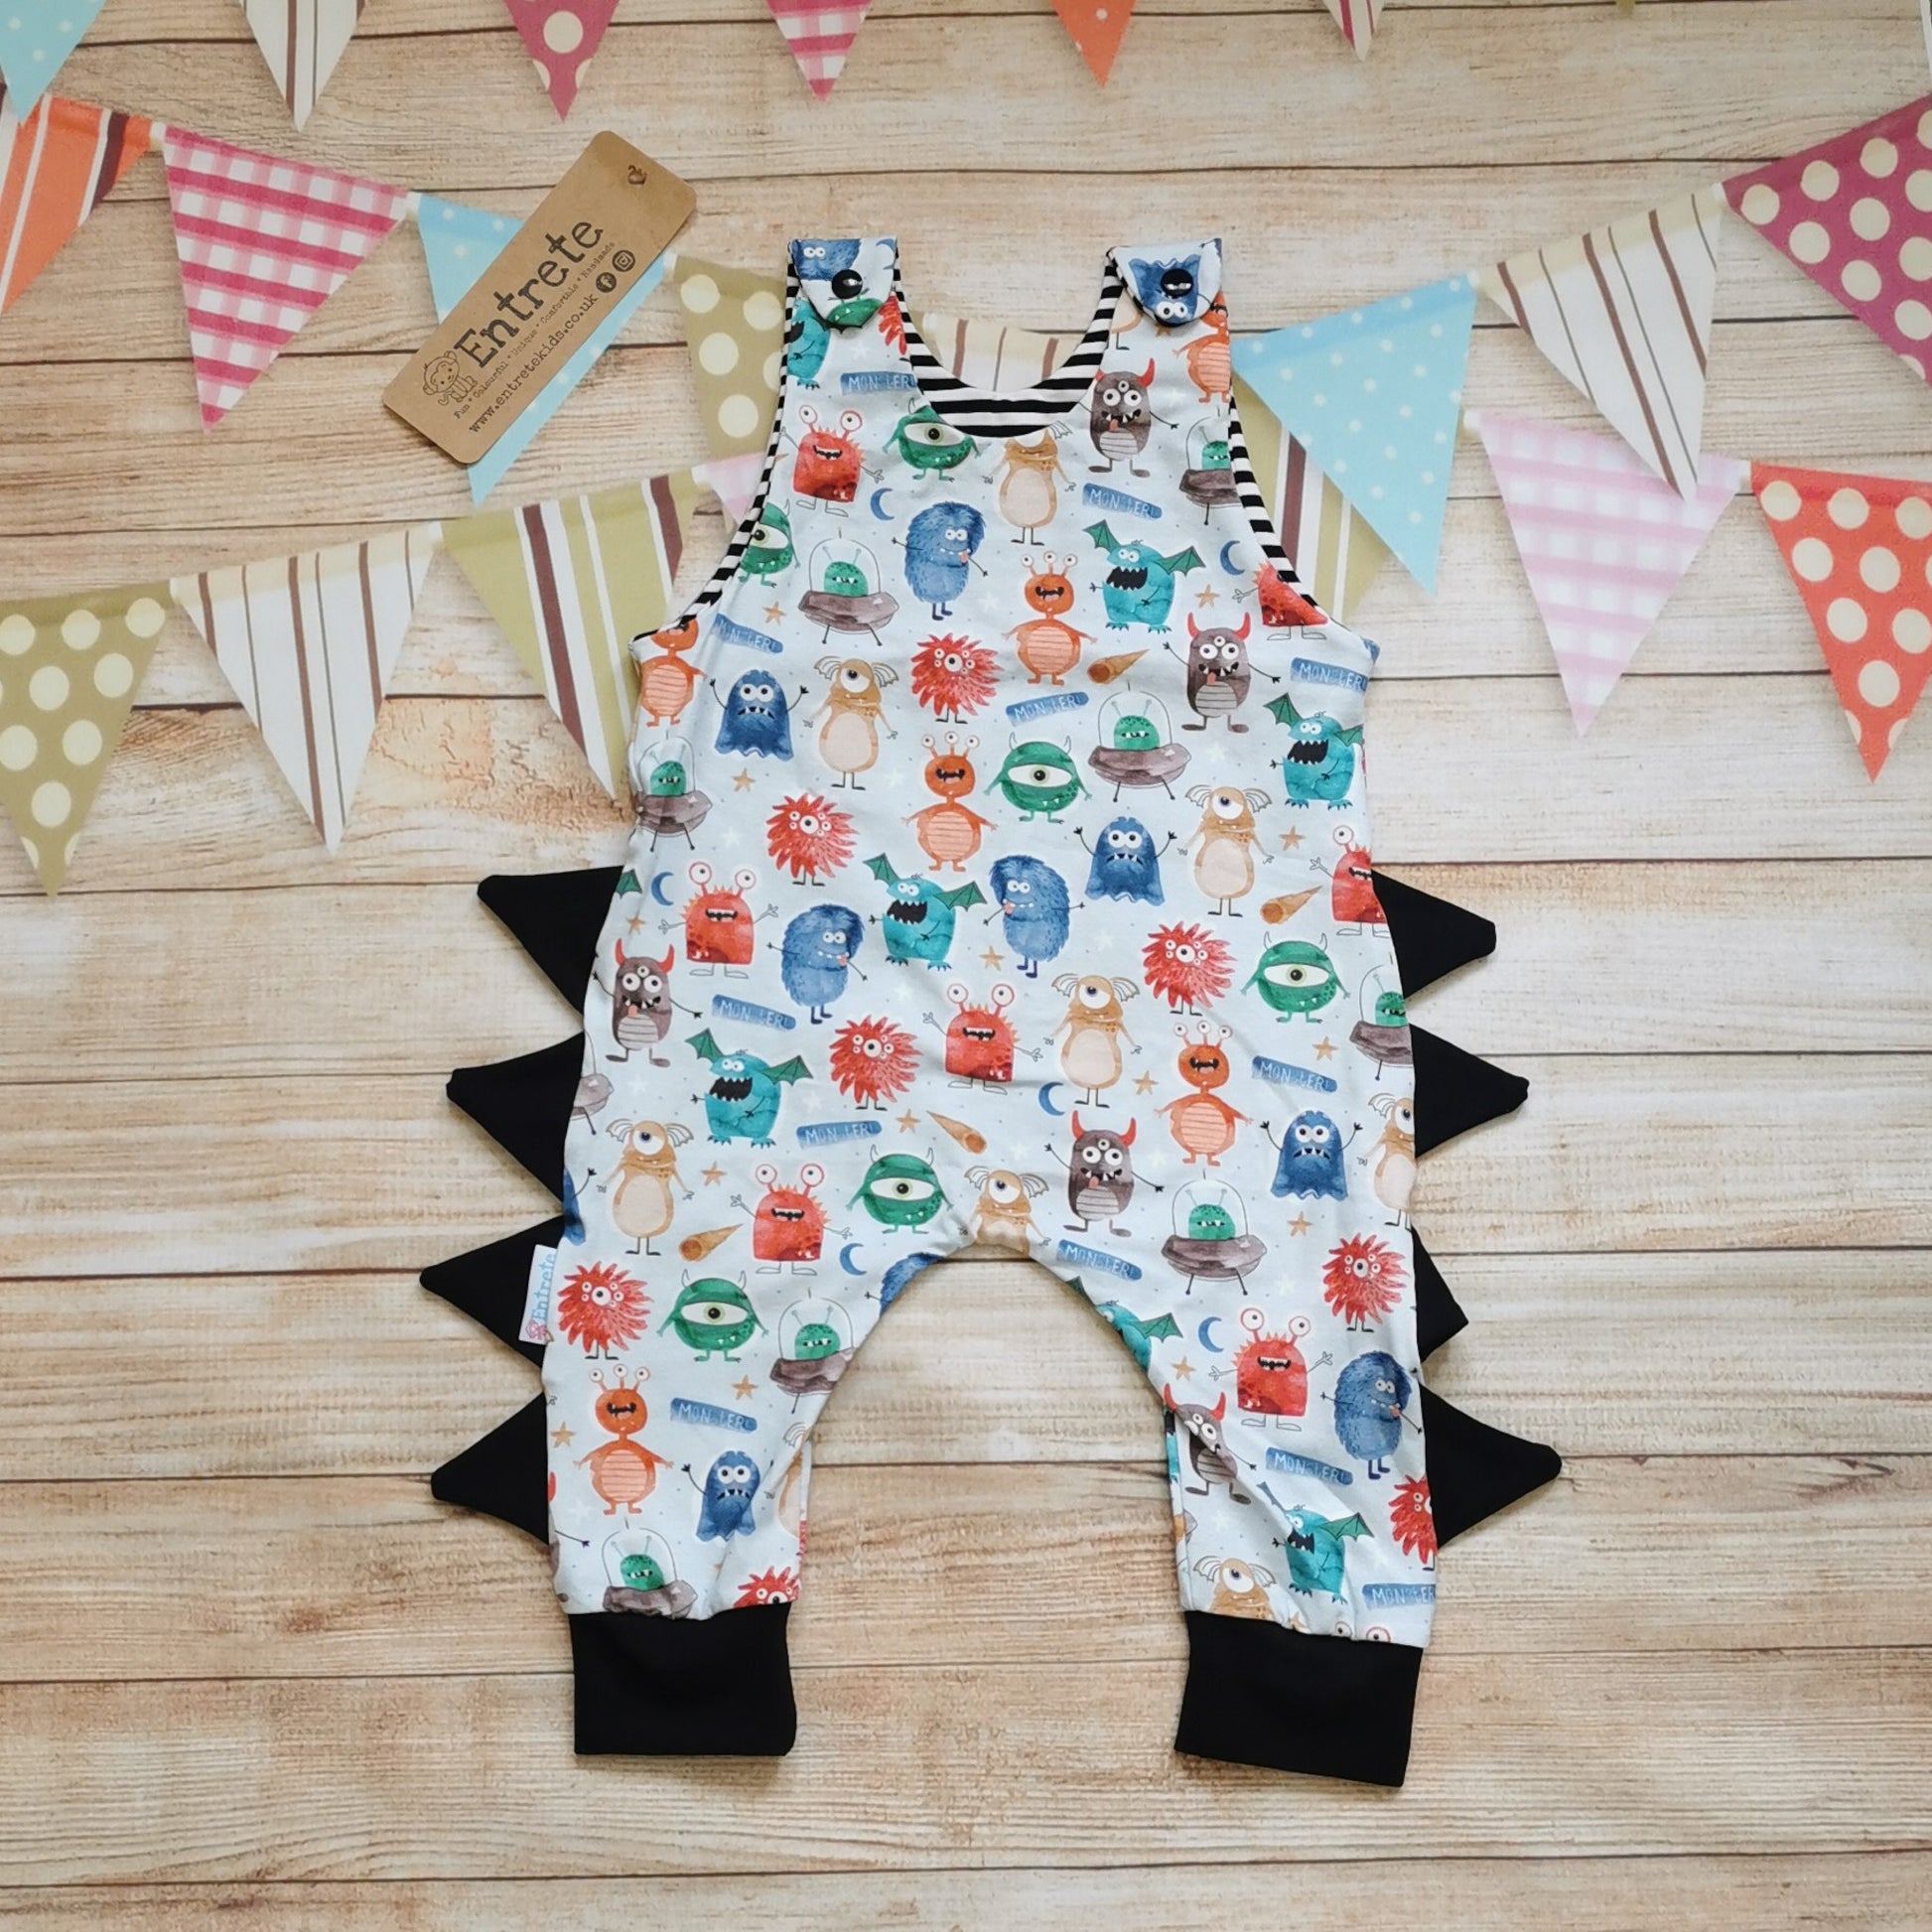 Front view of the insanely fun monster romper. Handmade from pale blue monsters cotton jersey, with black cotton jersey side detailing and cuffs and striped cotton jersey upper lining.